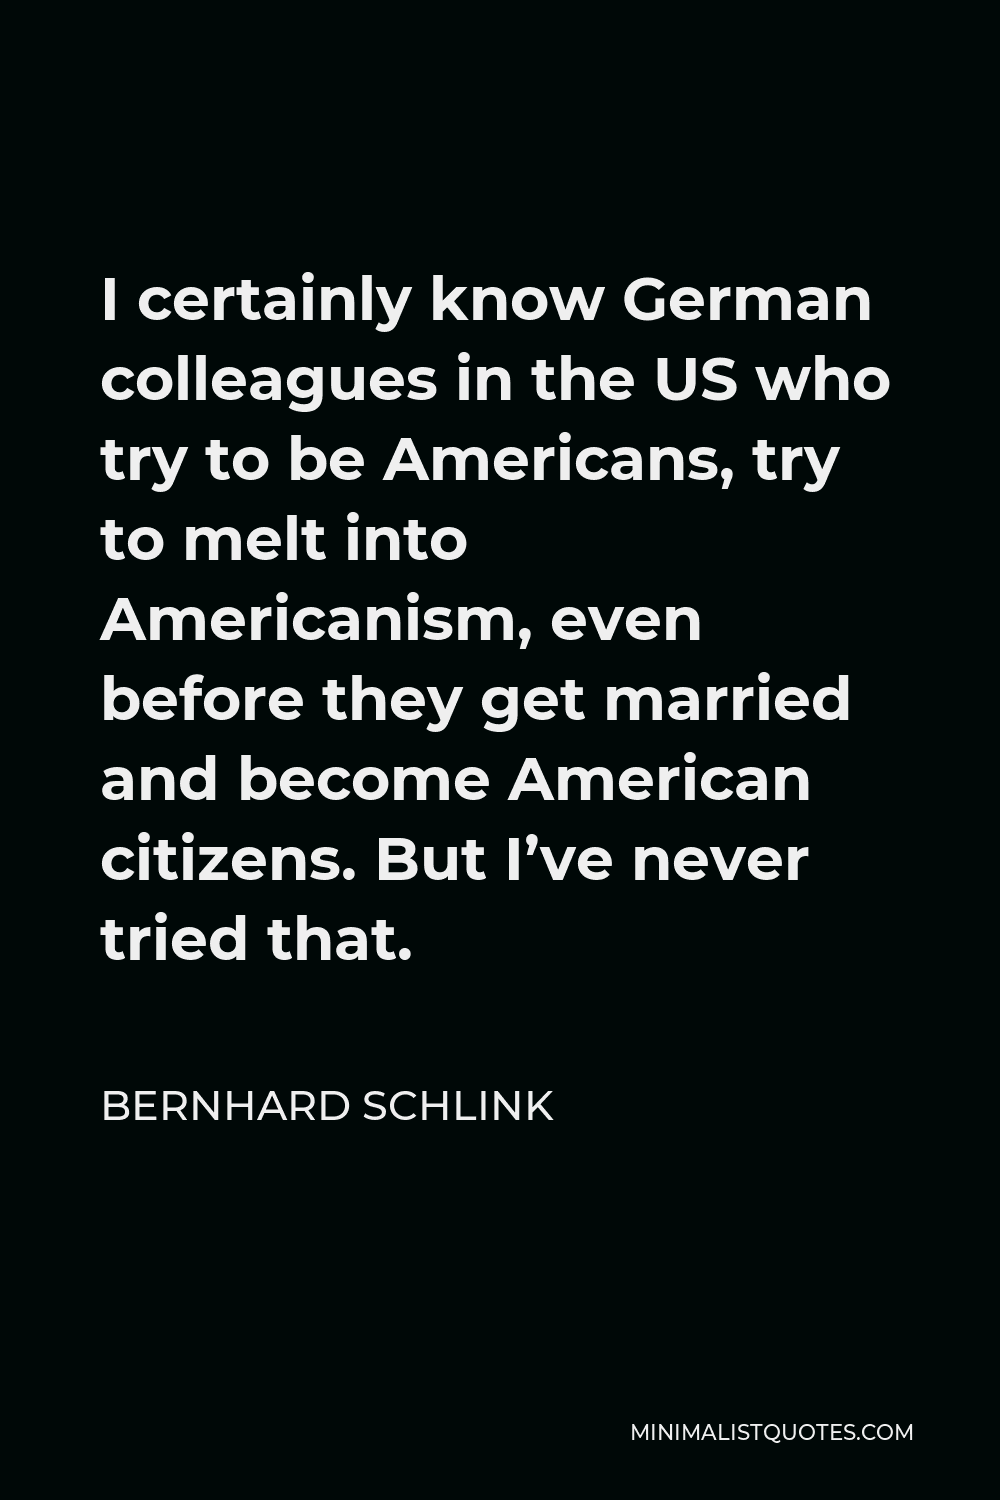 Bernhard Schlink Quote - I certainly know German colleagues in the US who try to be Americans, try to melt into Americanism, even before they get married and become American citizens. But I’ve never tried that.